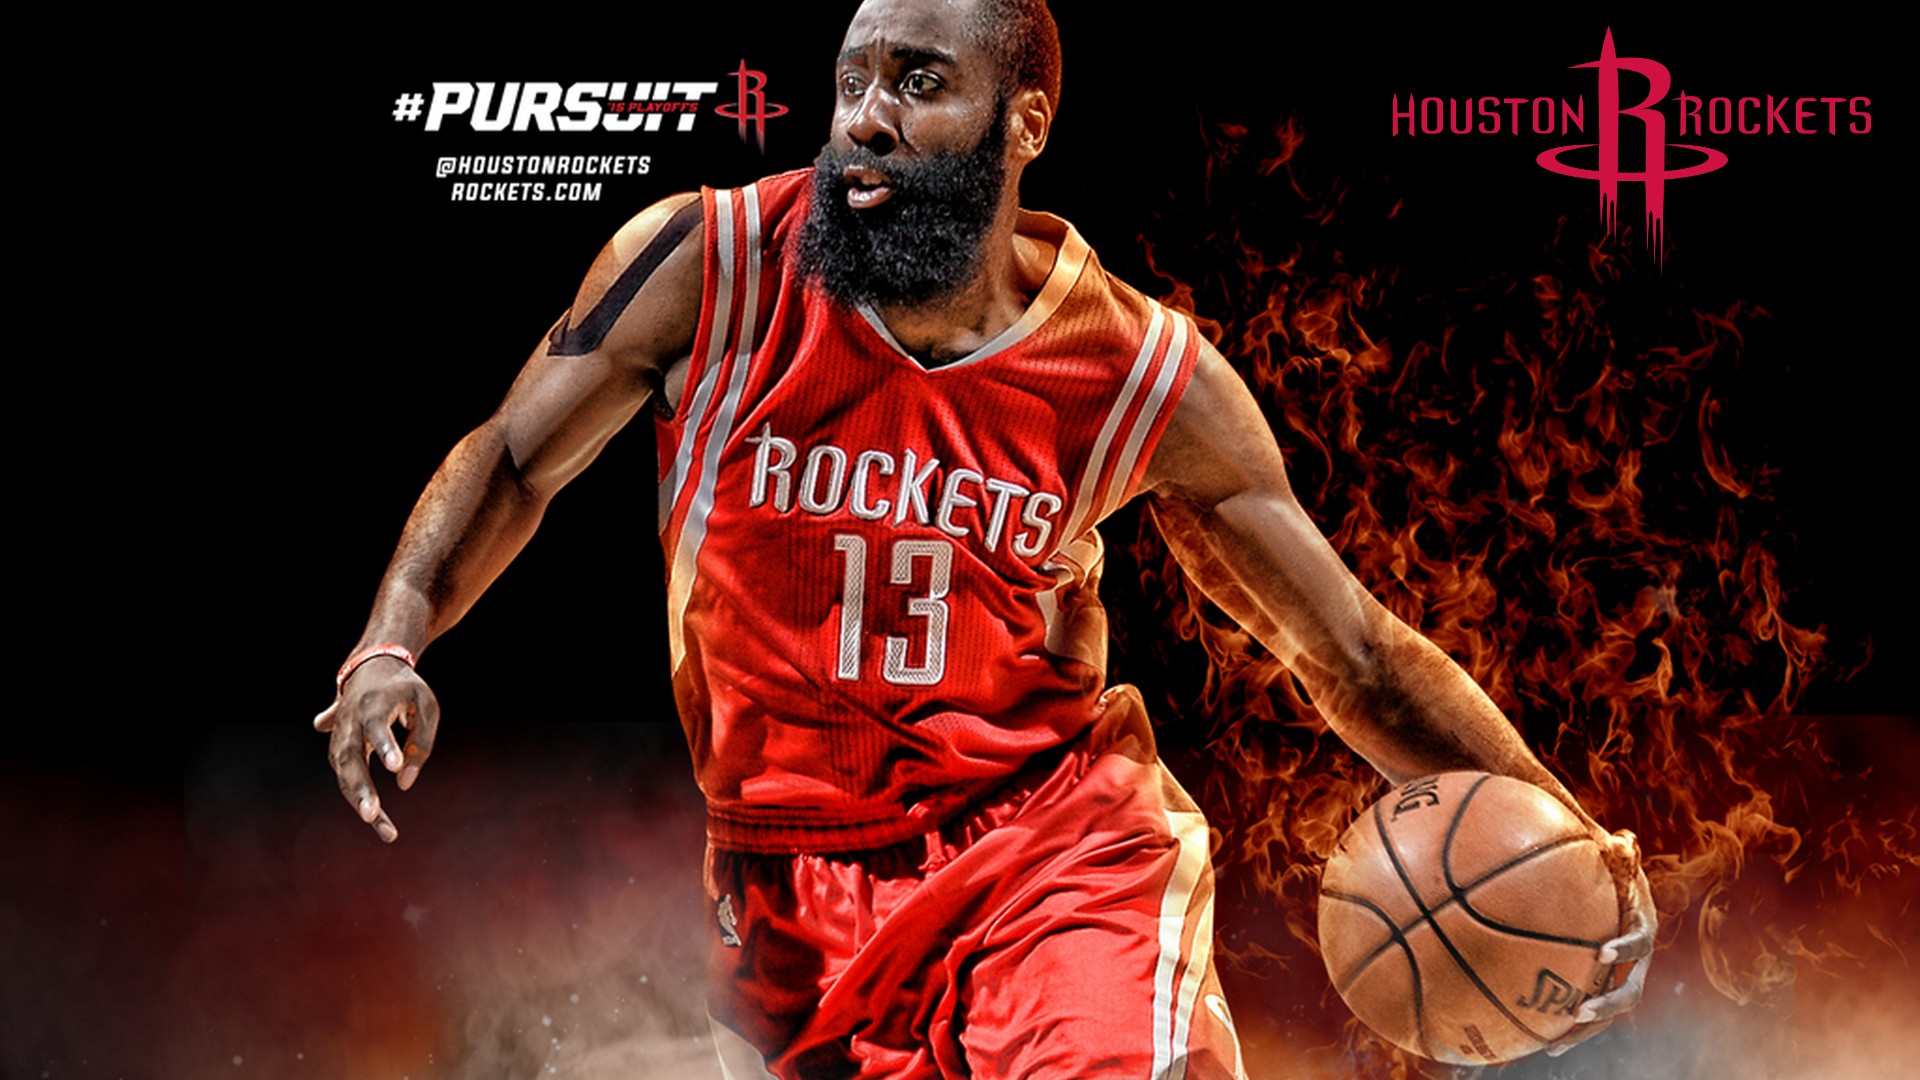 James Harden For Desktop Wallpaper with image dimensions 1920x1080 pixel. You can make this wallpaper for your Desktop Computer Backgrounds, Windows or Mac Screensavers, iPhone Lock screen, Tablet or Android and another Mobile Phone device